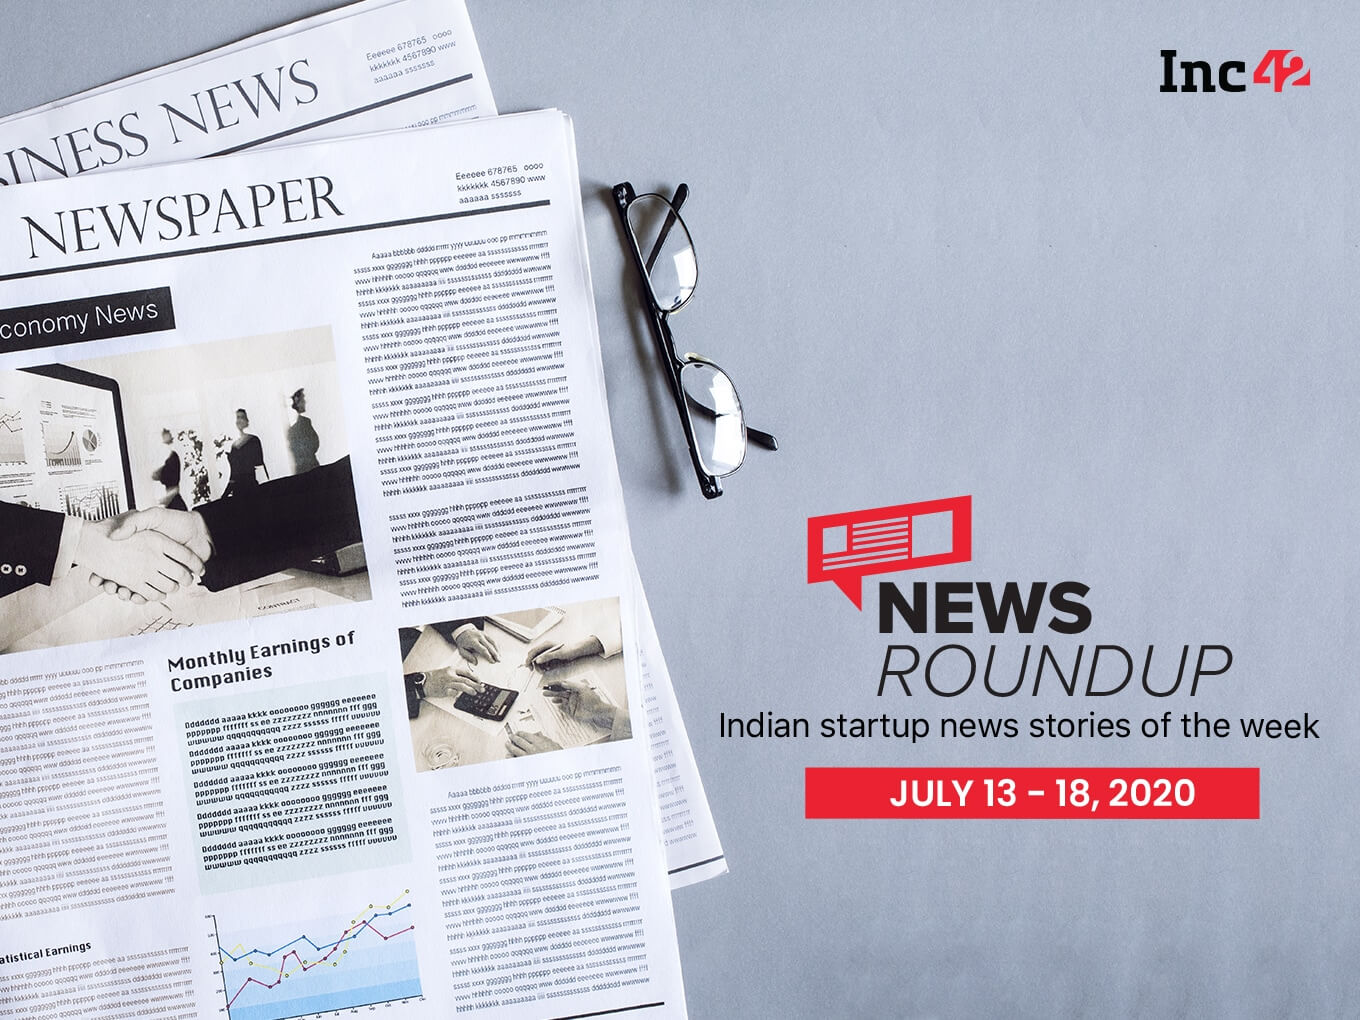 News Roundup: Indian Startup News Stories Of The Week [July 13-18]